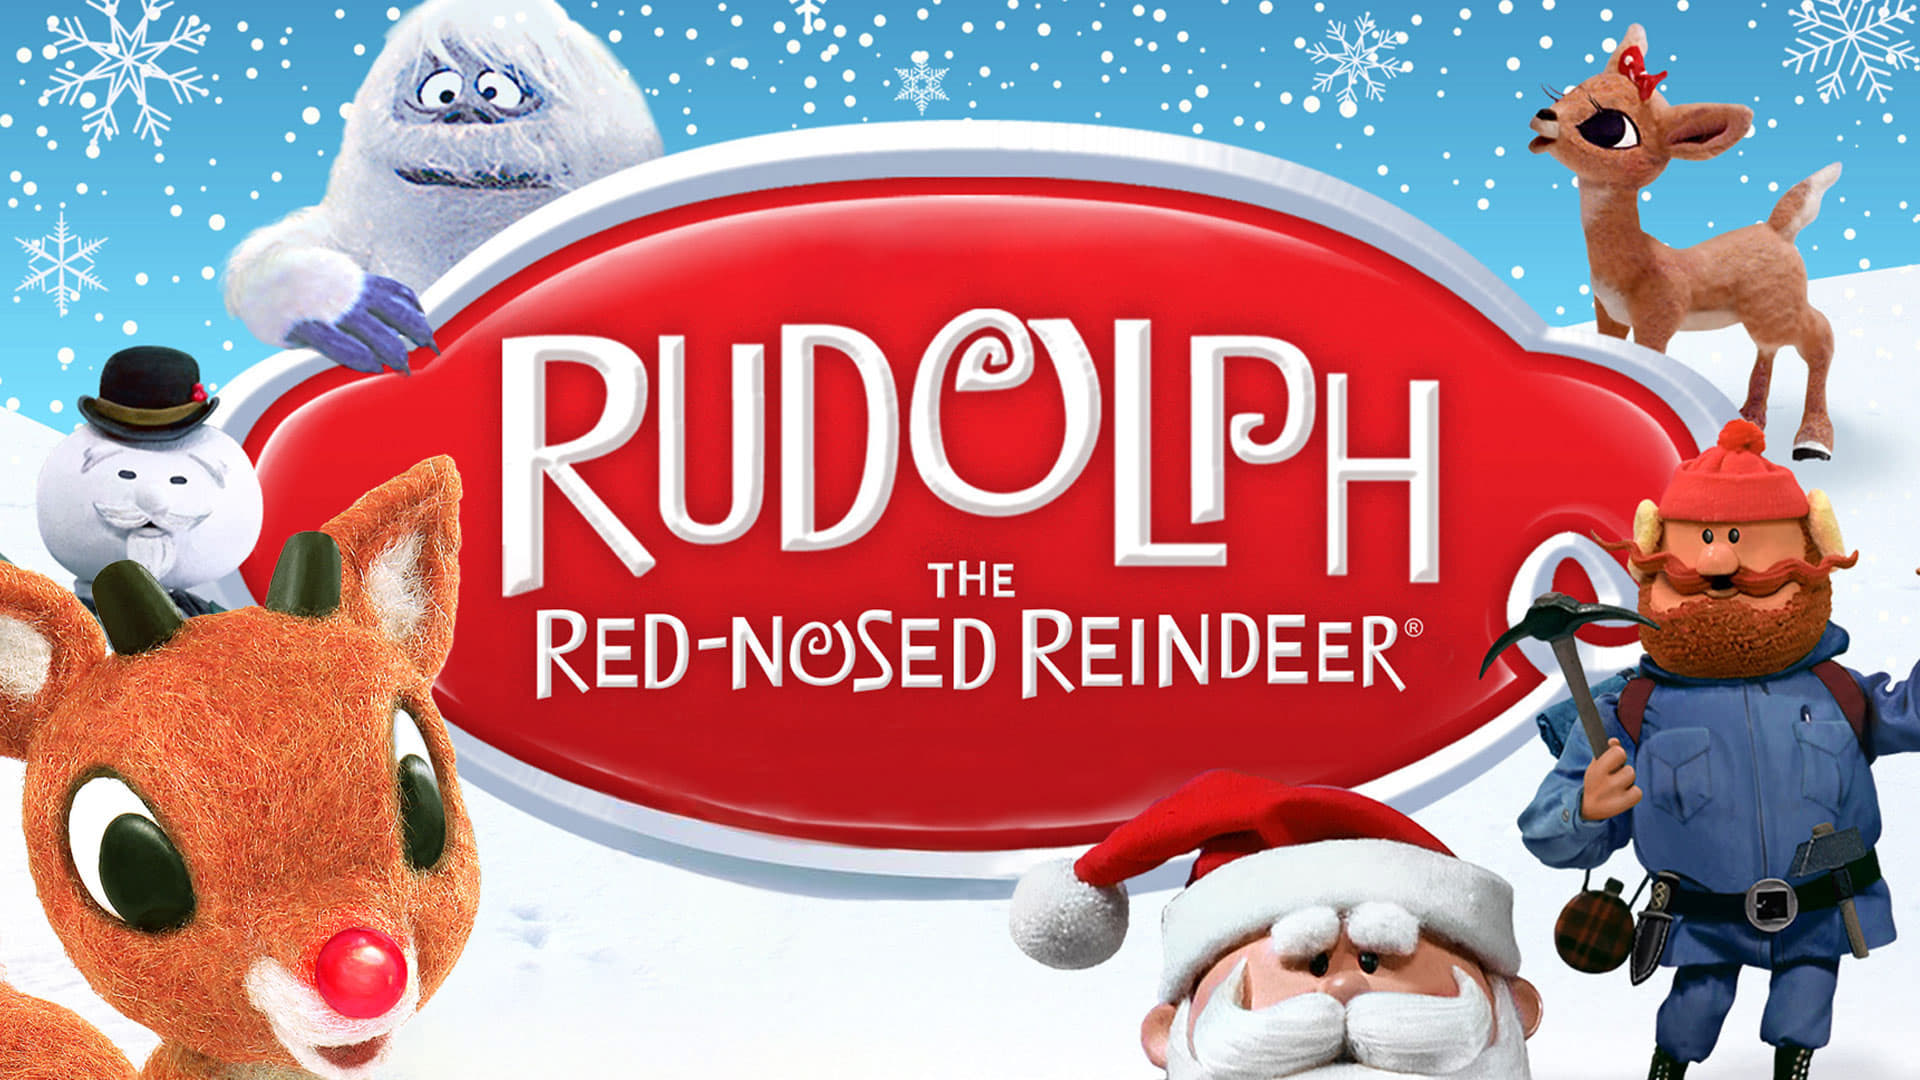 Rudolph the Red-Nosed Reindeer (TV Movie 1964)